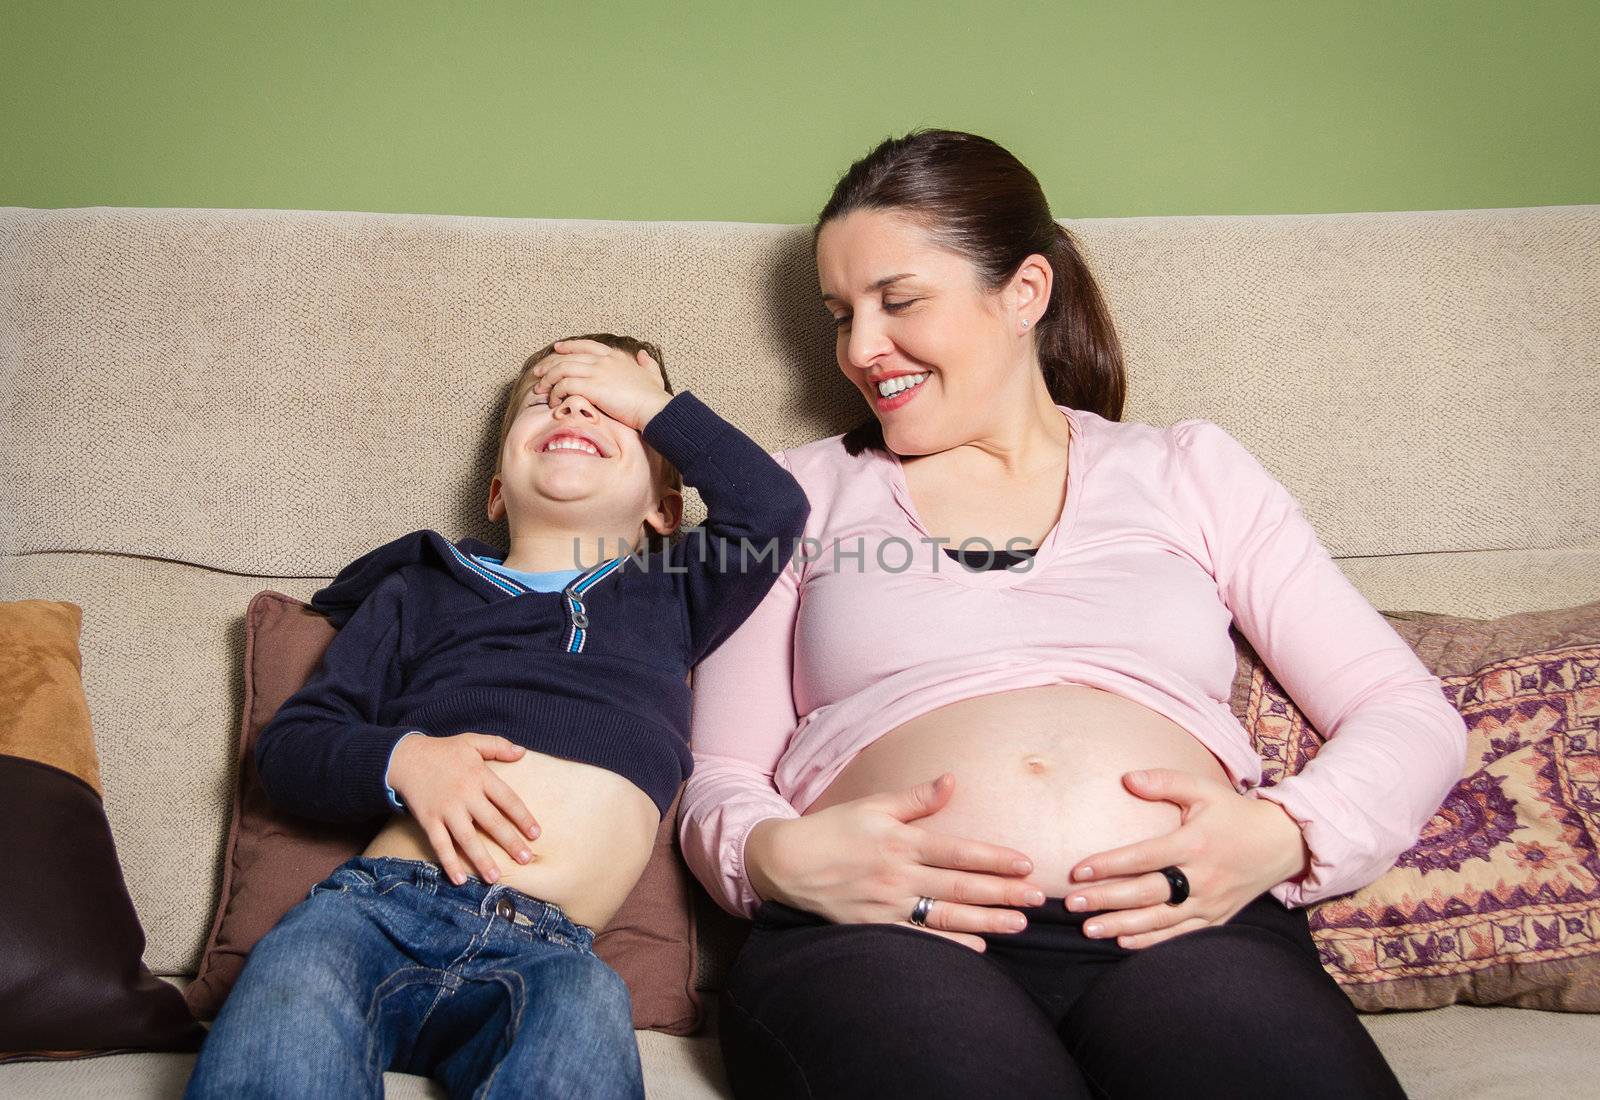 Pregnant mother and son laughing when comparing their bellies sitting on a sofa